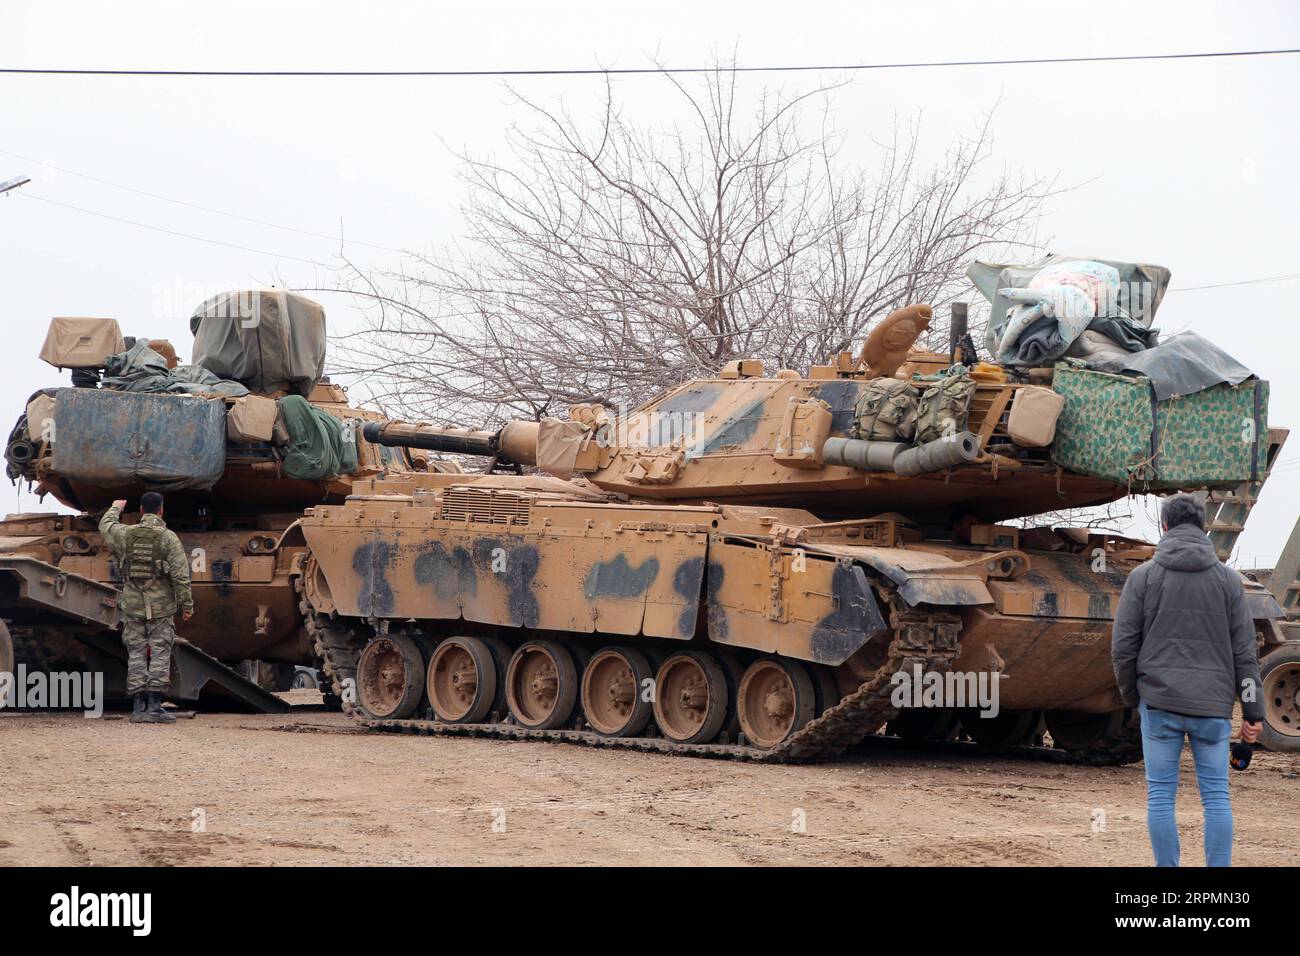 200214 -- ANKARA, Feb. 14, 2020 Xinhua -- Turkish tanks are seen in Reyhanli district of Hatay, Turkey, on Feb. 14, 2020. Turkey has poured in the last few days thousands of troops and convoys of military vehicles across the border, including tanks, armored personnel carriers and radar equipment in order to bolster its 12 observation posts. Photo by Mustafa Kaya/Xinhua TURKEY-HATAY-SYRIAN BORDER-MILITARY PRESENCE-INCREASING PUBLICATIONxNOTxINxCHN Stock Photo